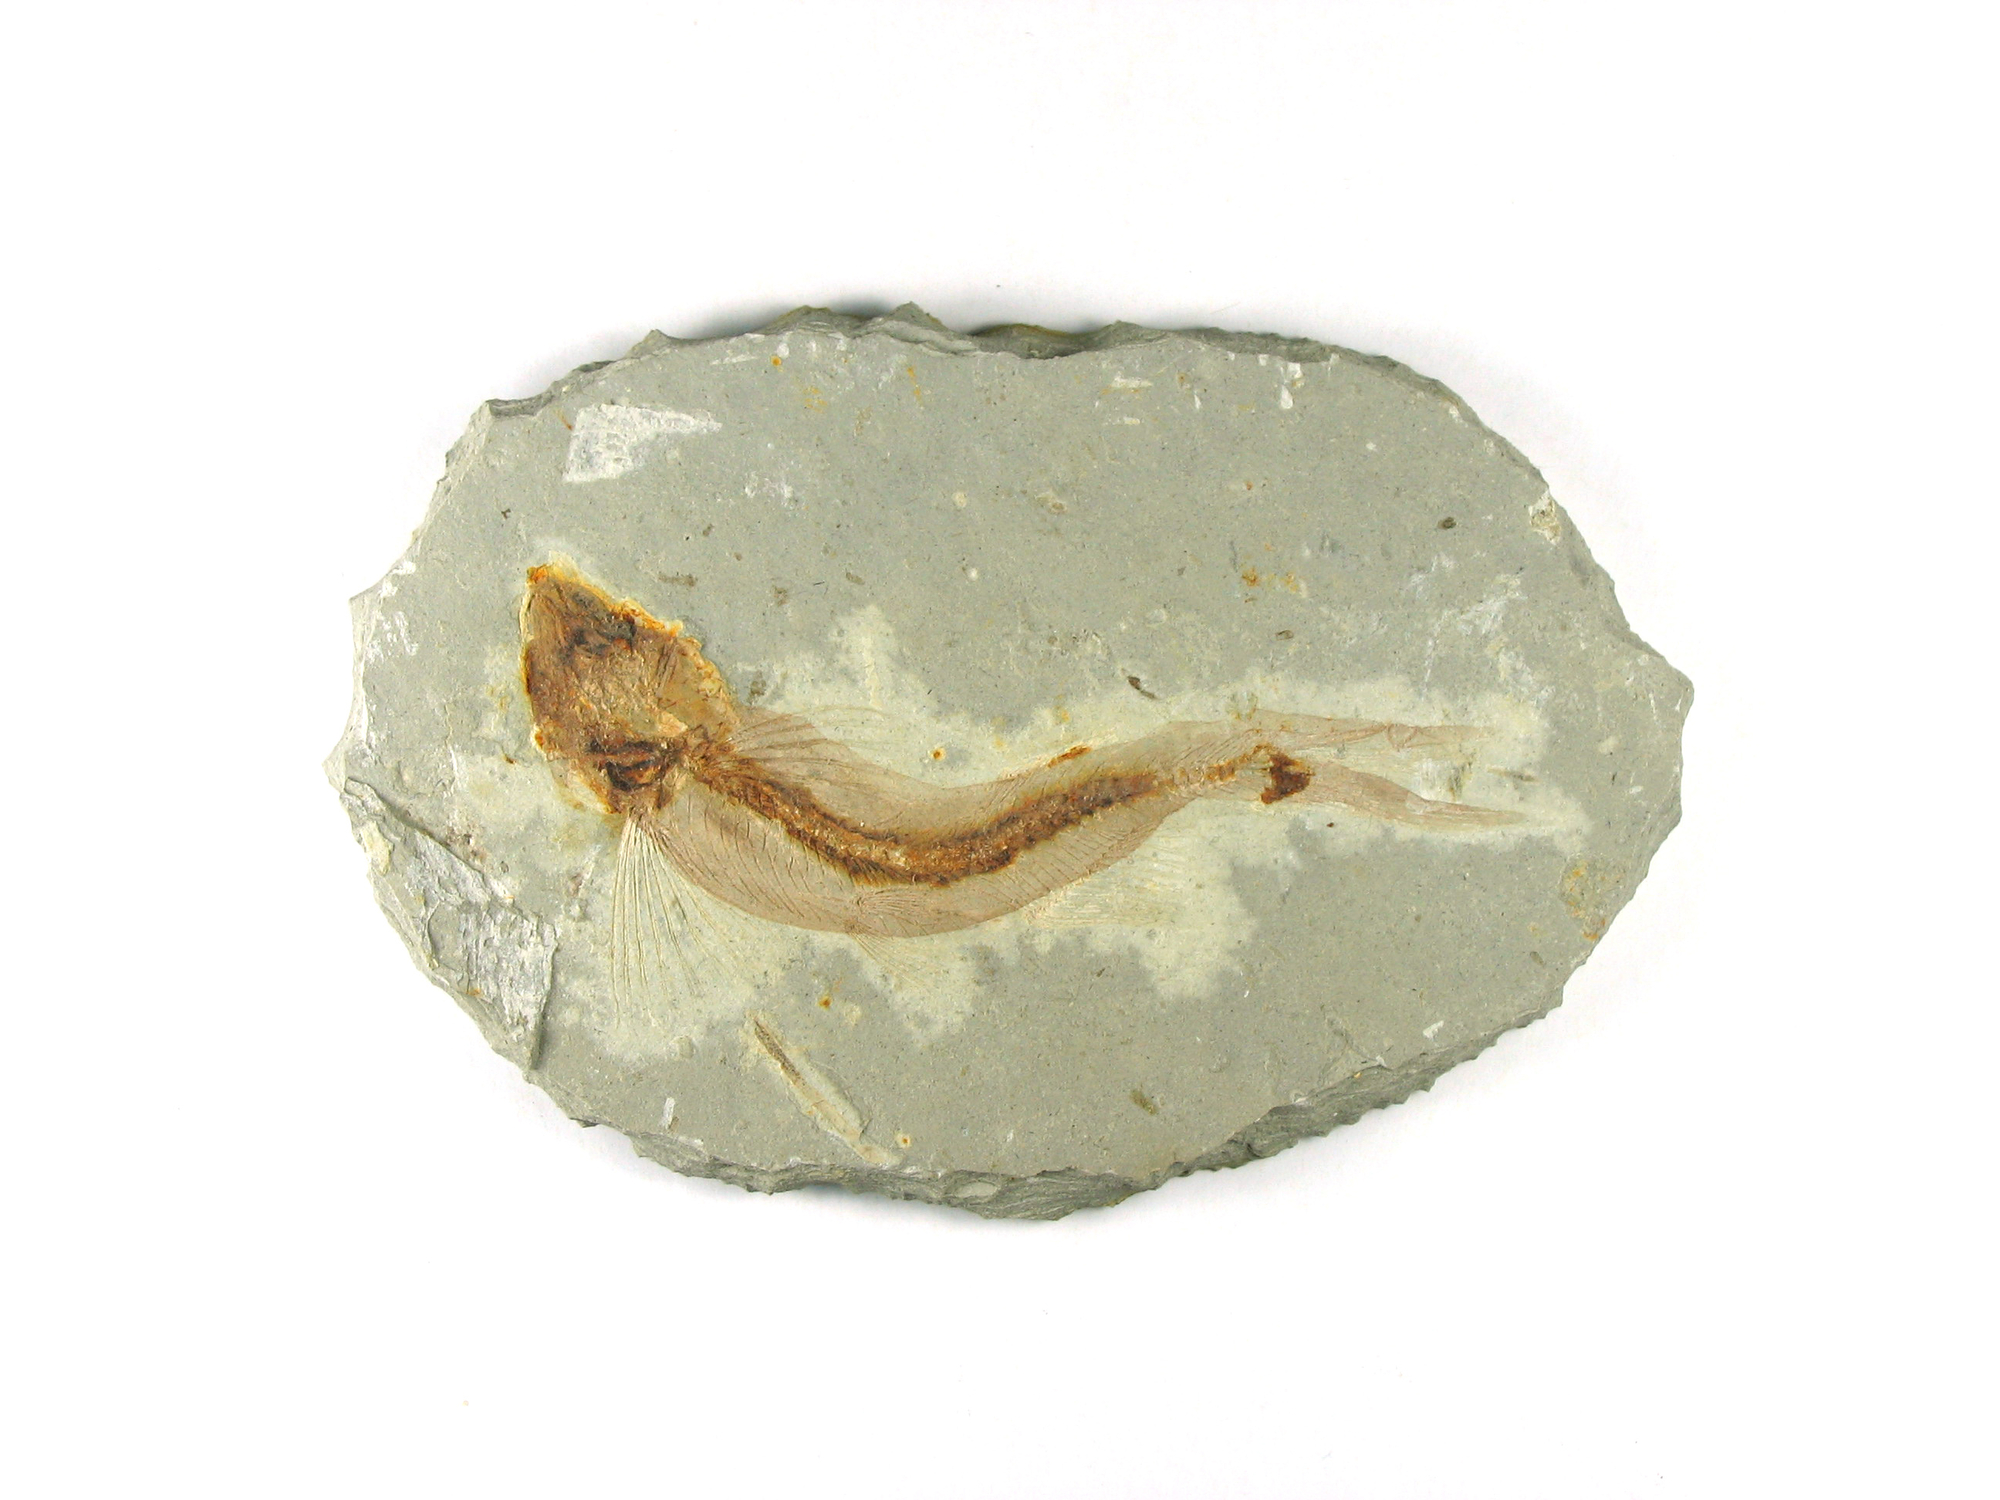 A complete fish fossil